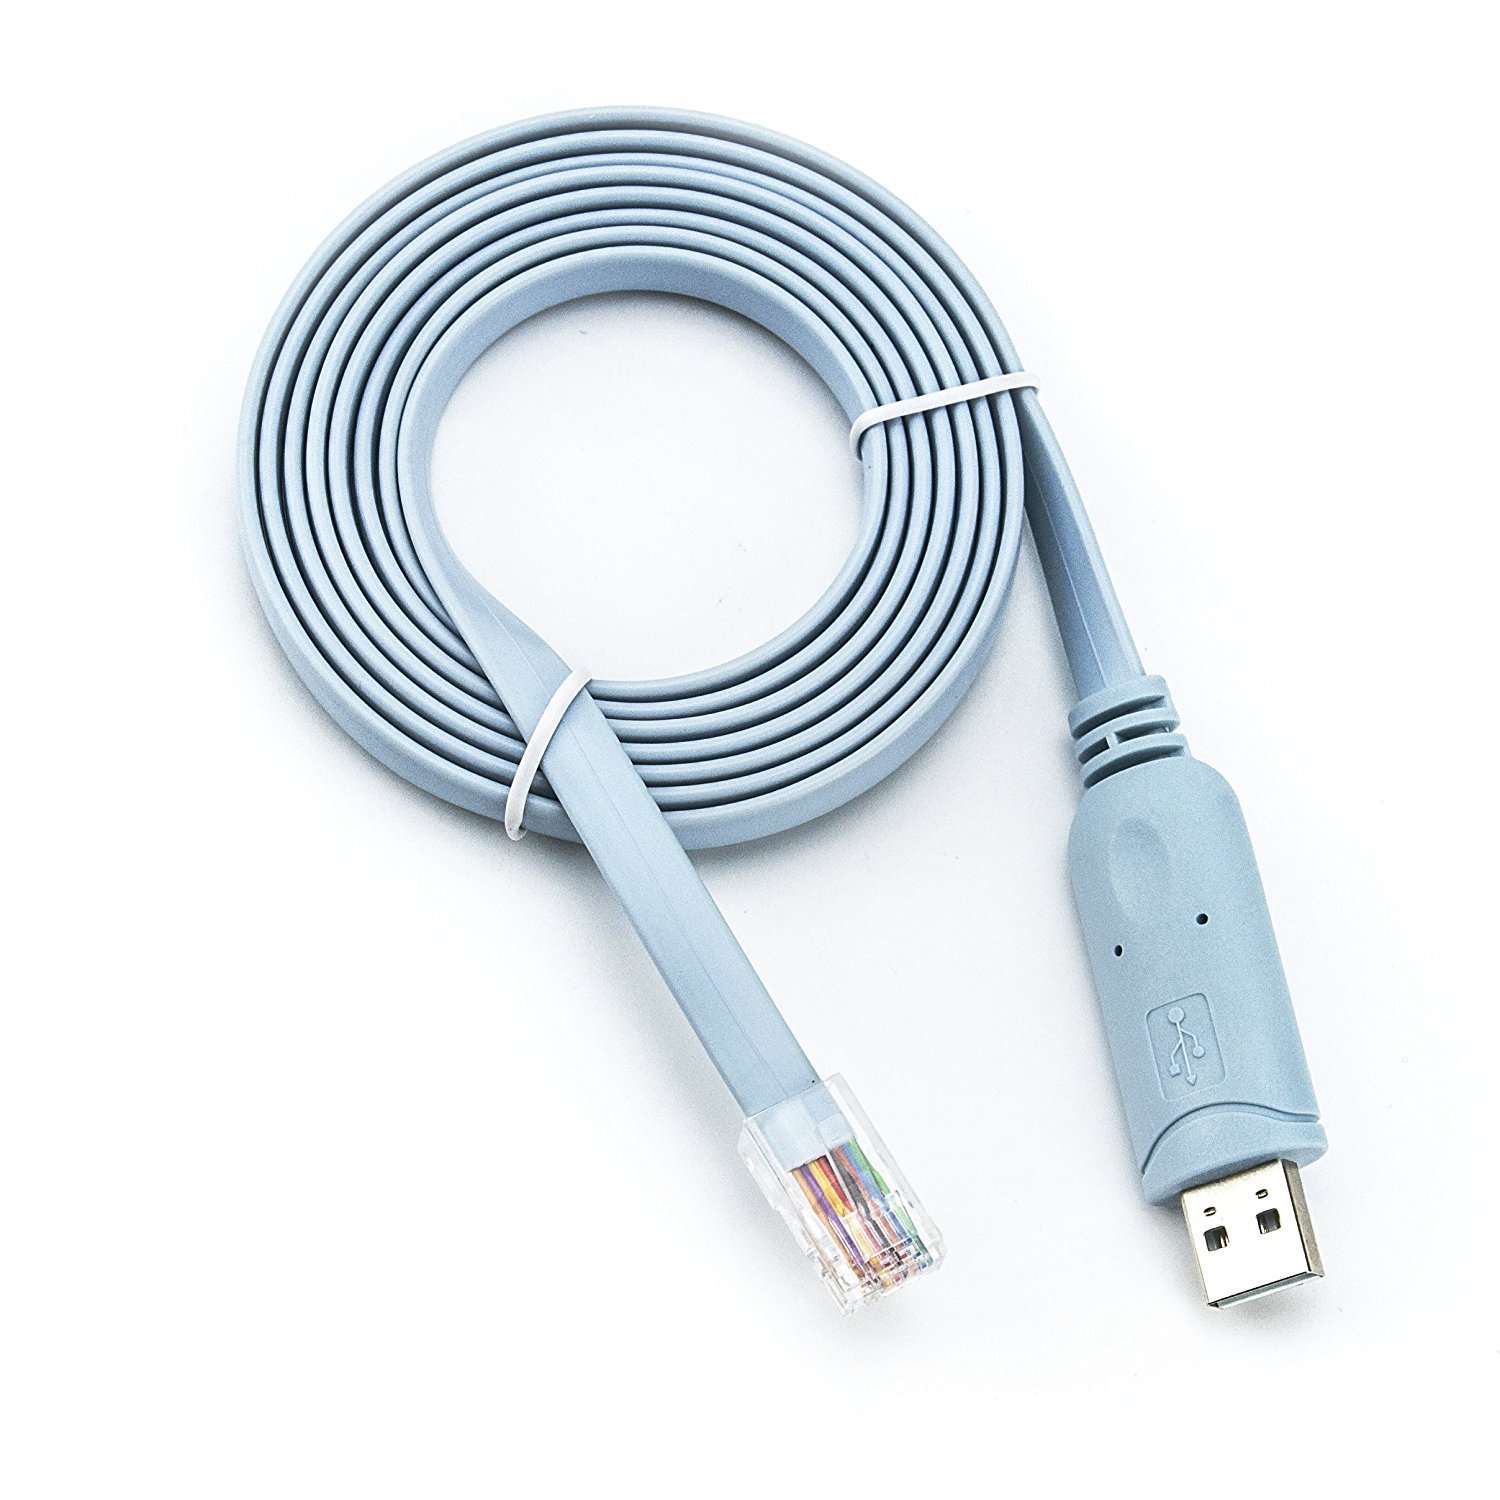 6" FTDI FT232R chip / USB to RJ45 Console Cable - Click Image to Close